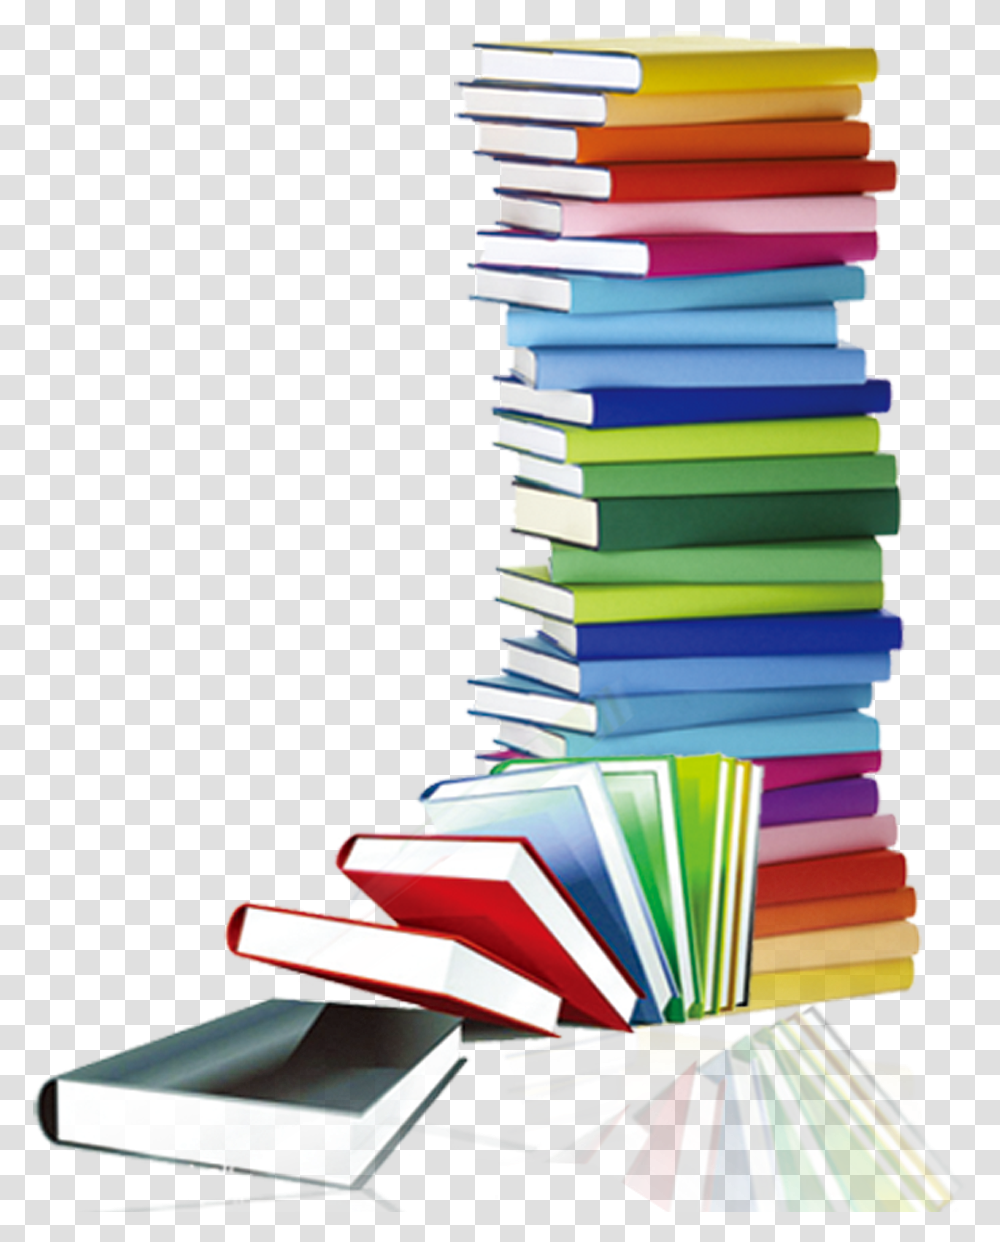 Book Library Stack Clip Art Stack Of Books Rainbow, Paper, Home Decor Transparent Png